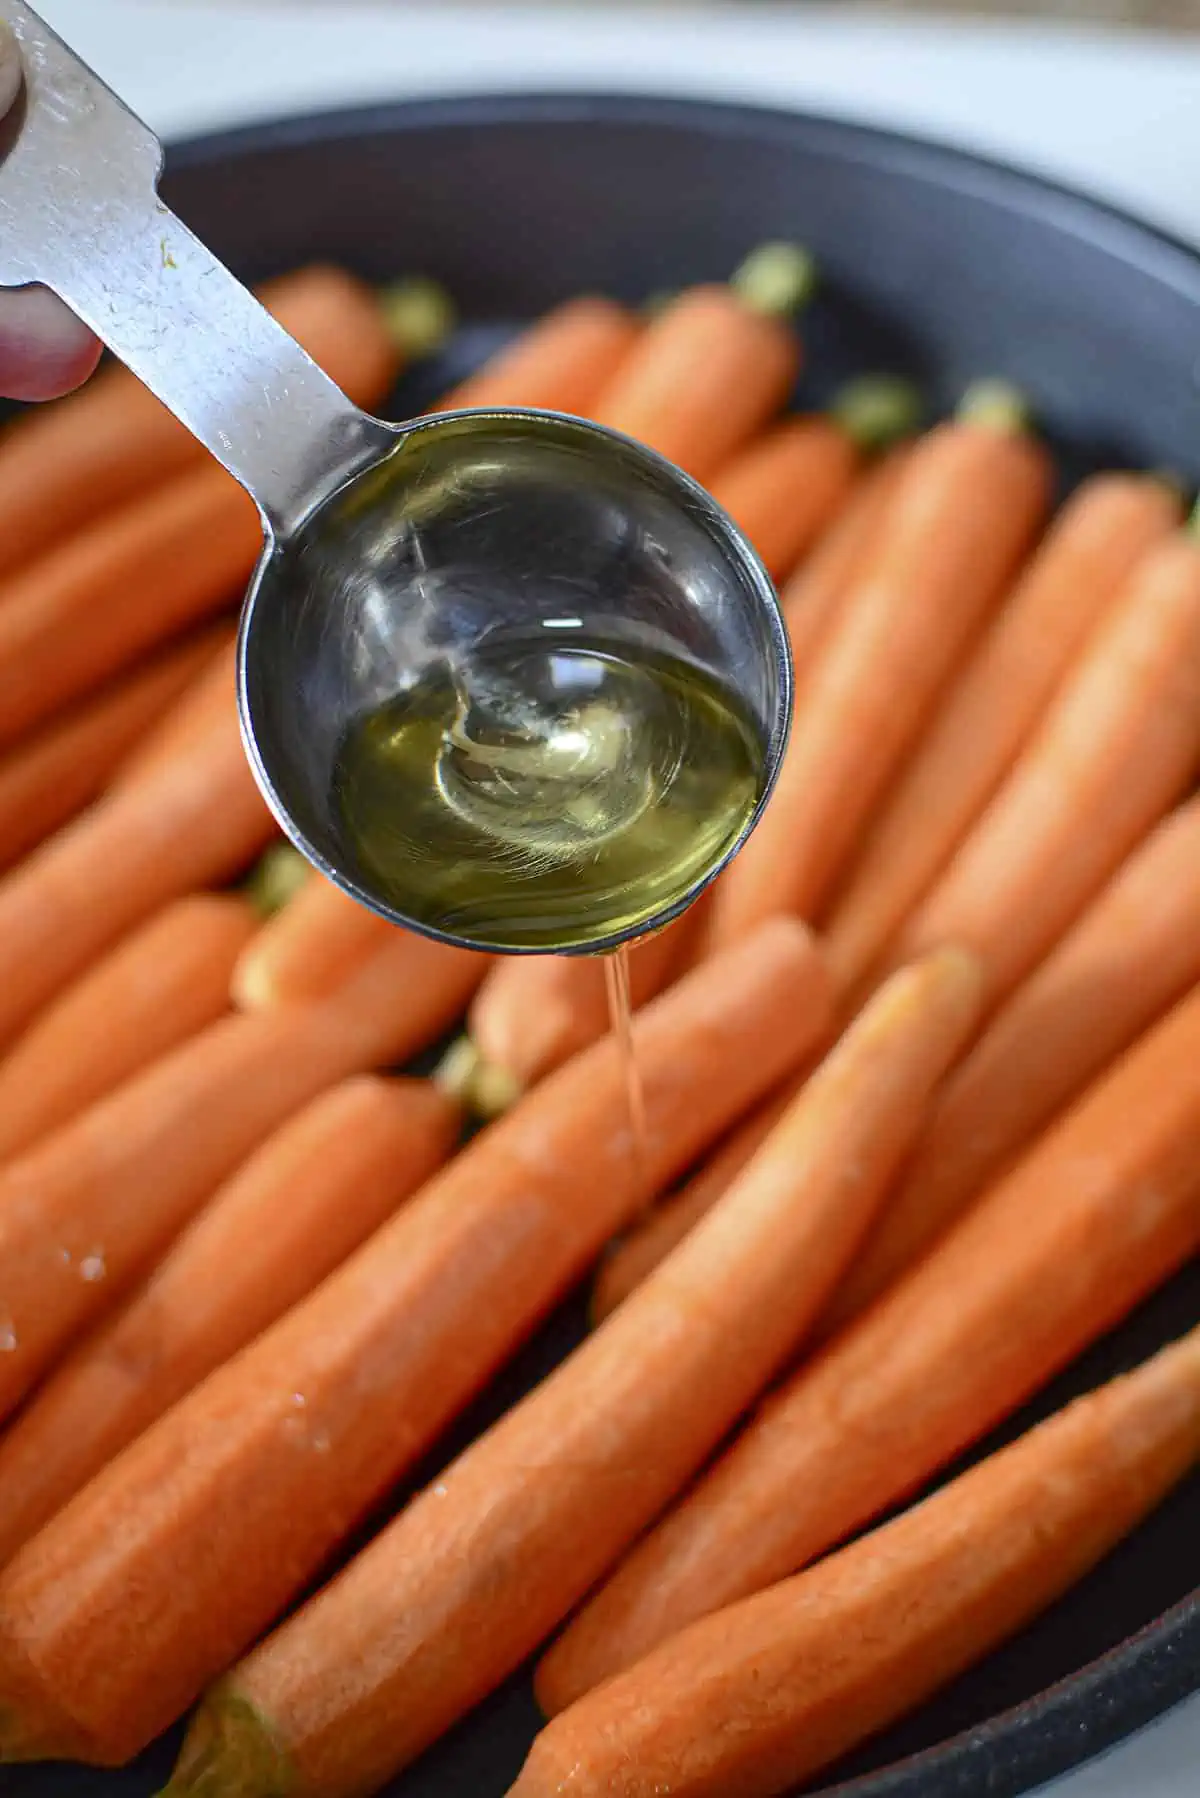 Oil being drizzled over carrots before roasting.